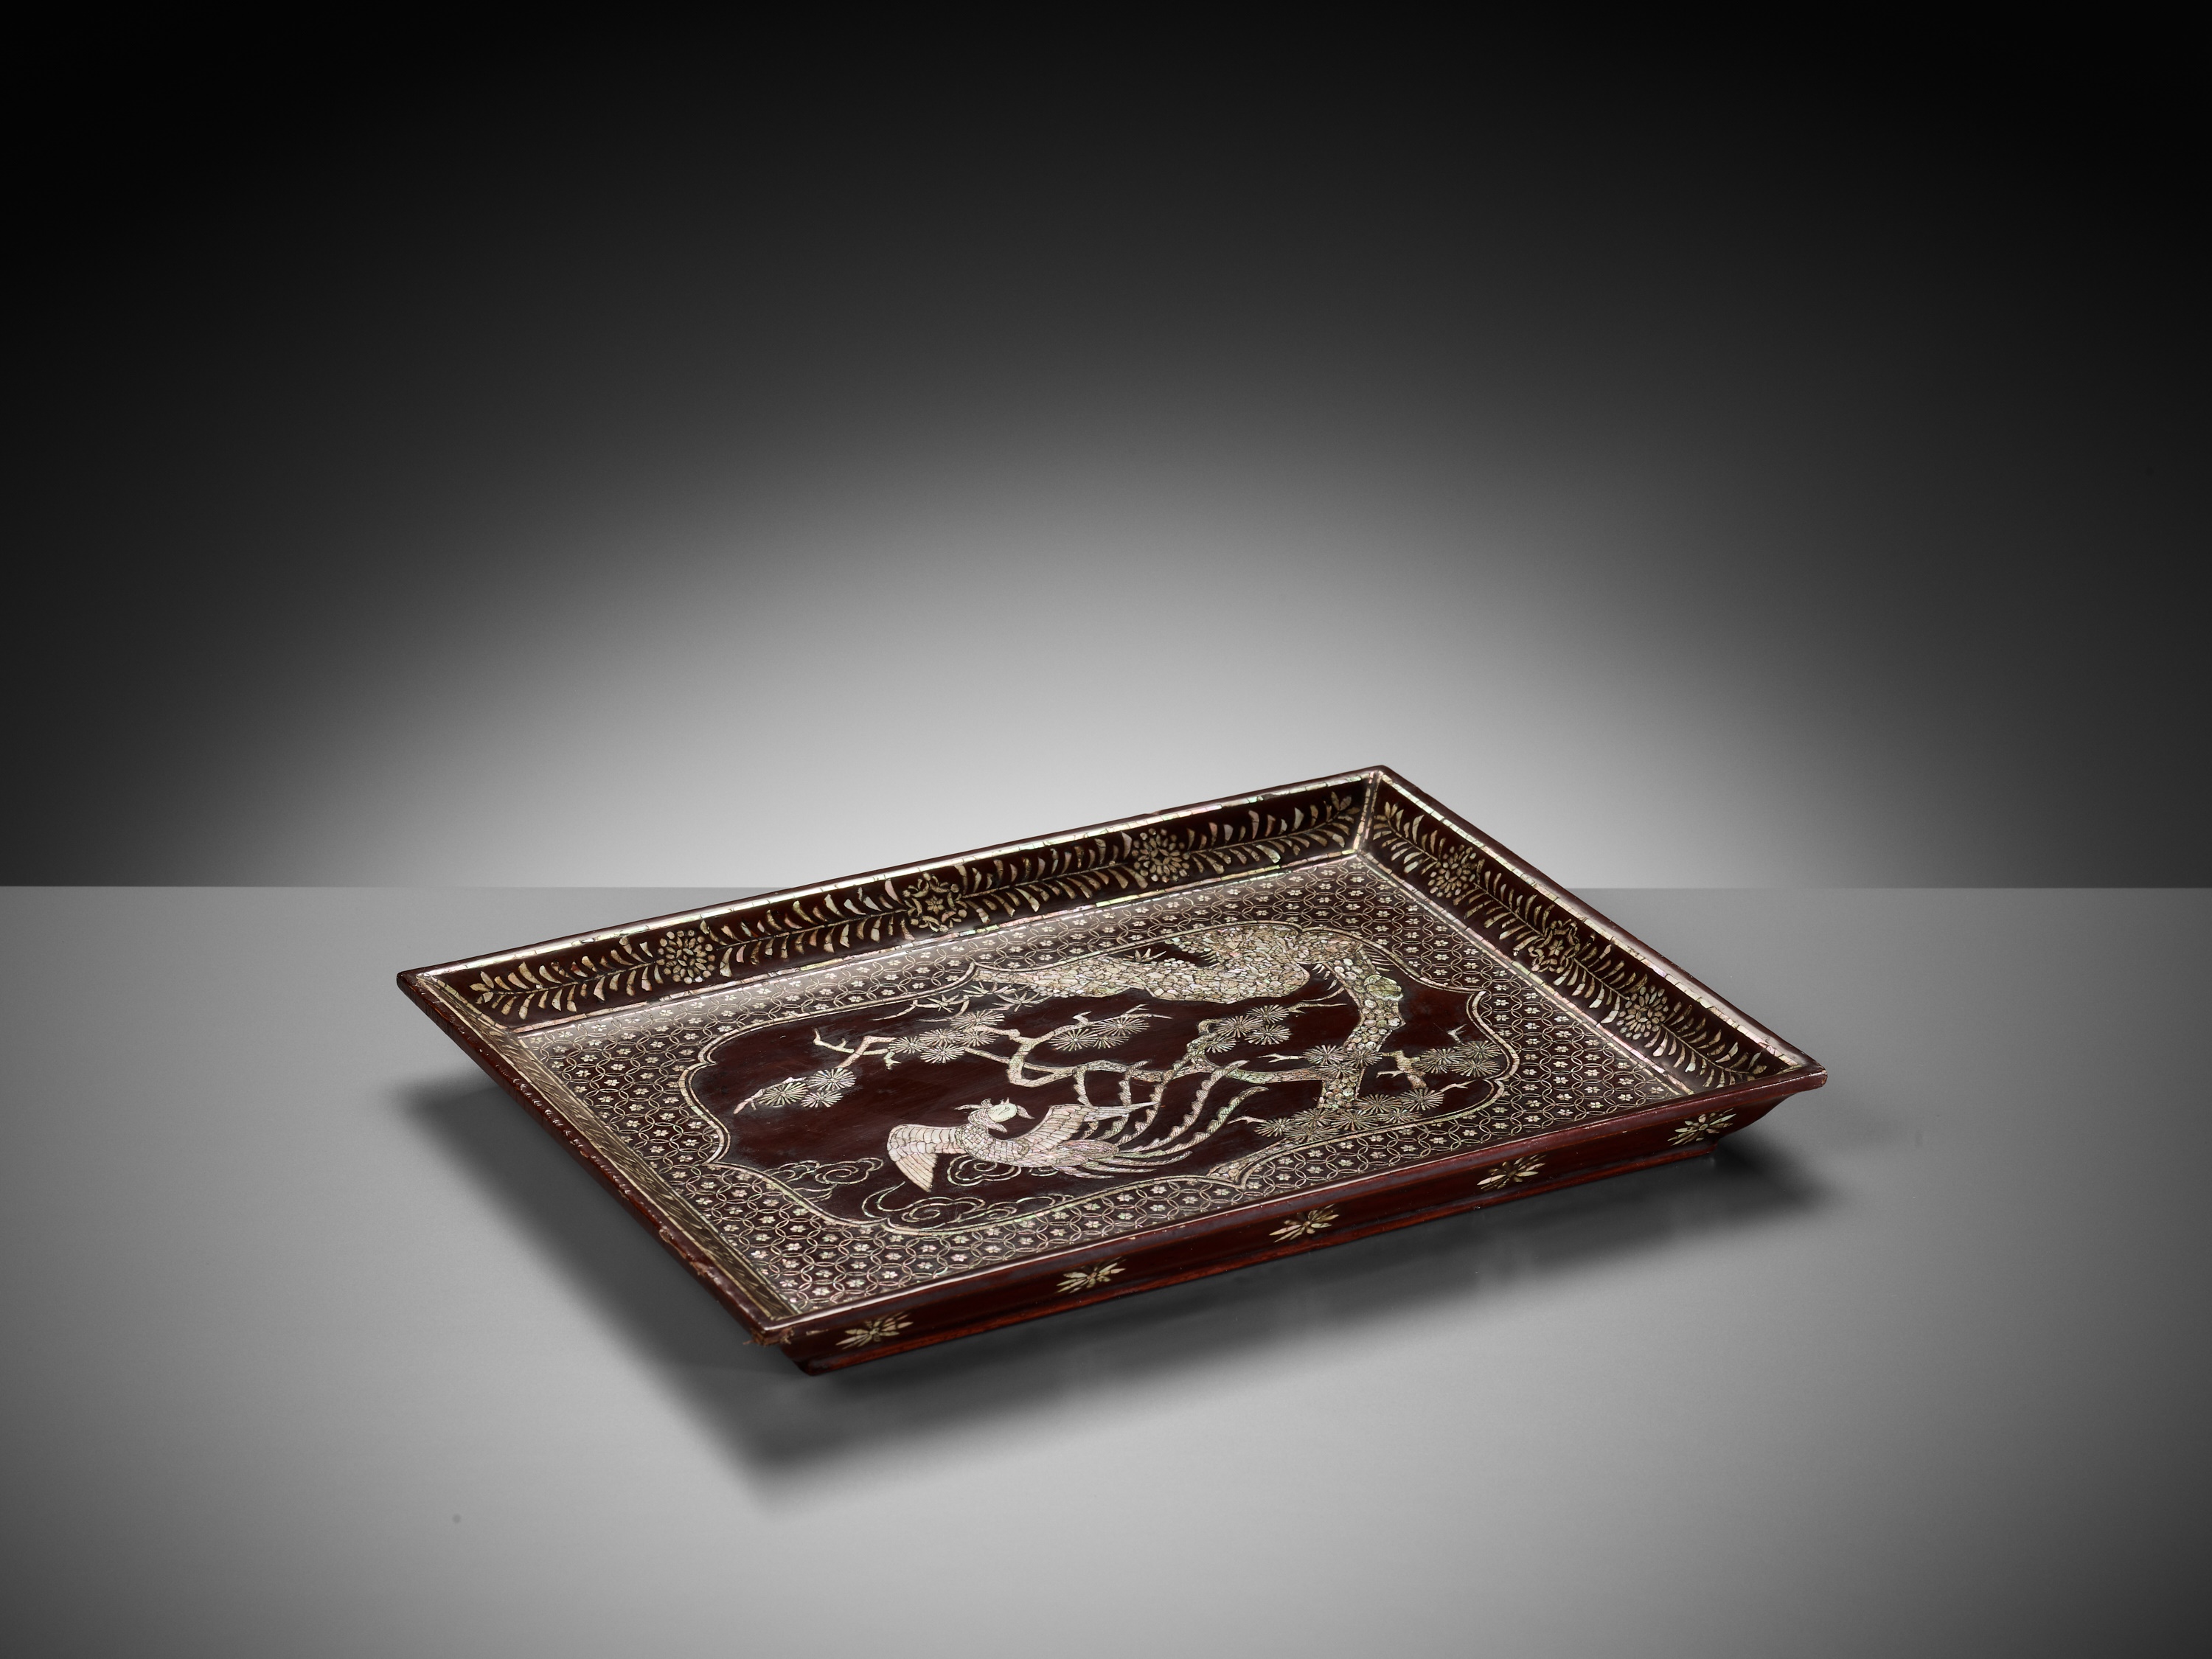 A RARE INLAID LACQUER 'PHOENIX' TRAY, MING DYNASTY - Image 3 of 8